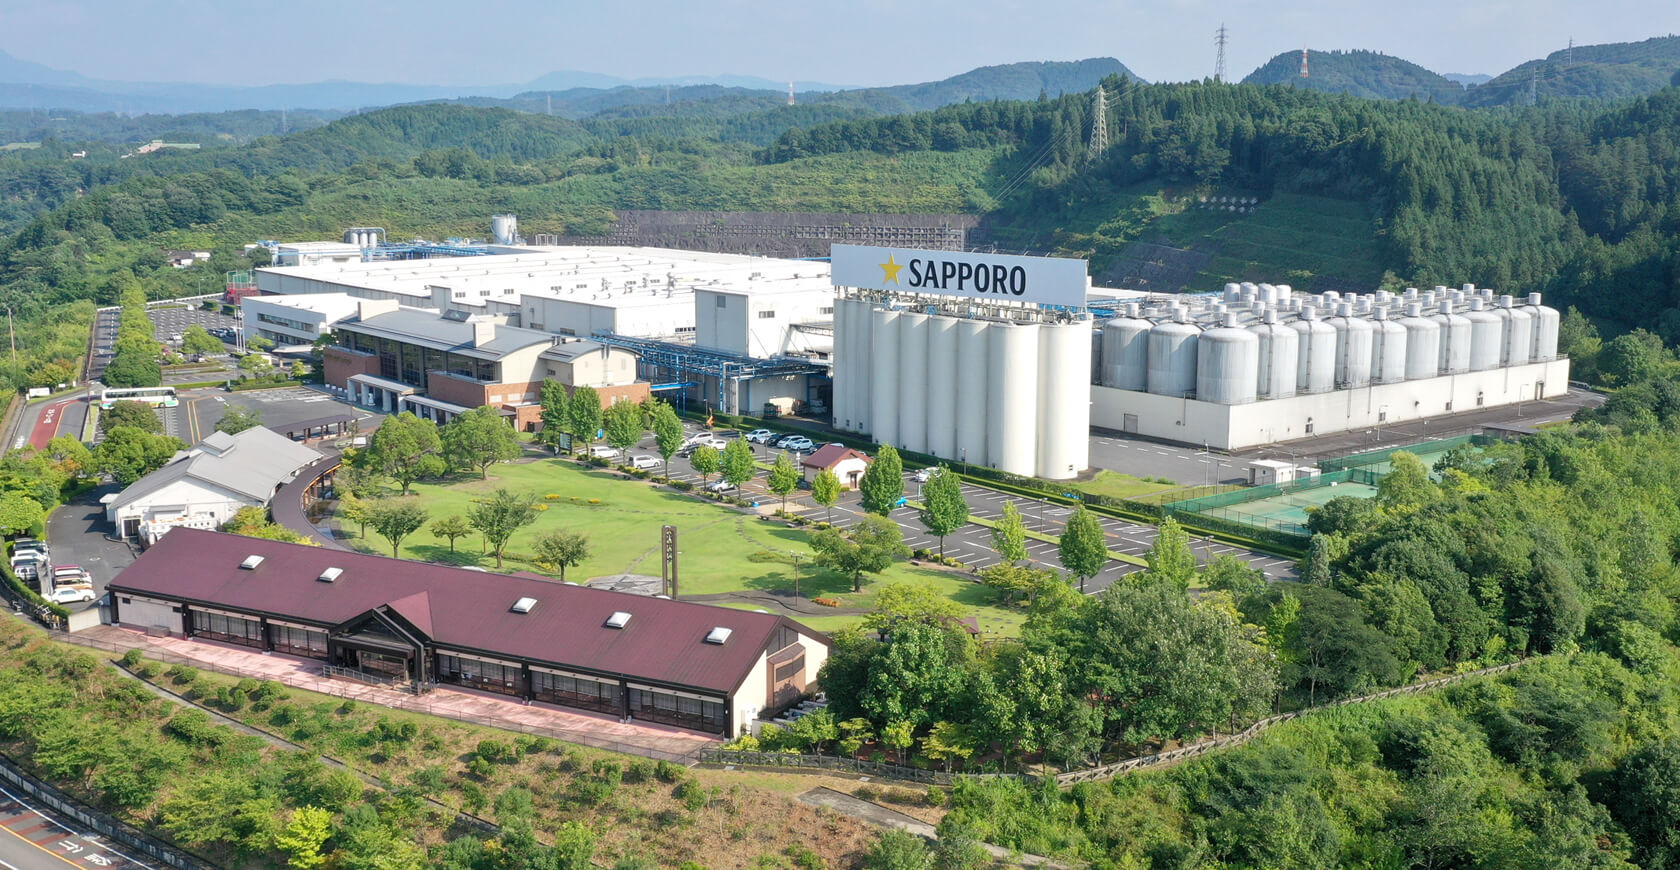 Mameda-cho Popular Facility for Brewery Tours and Tastings!